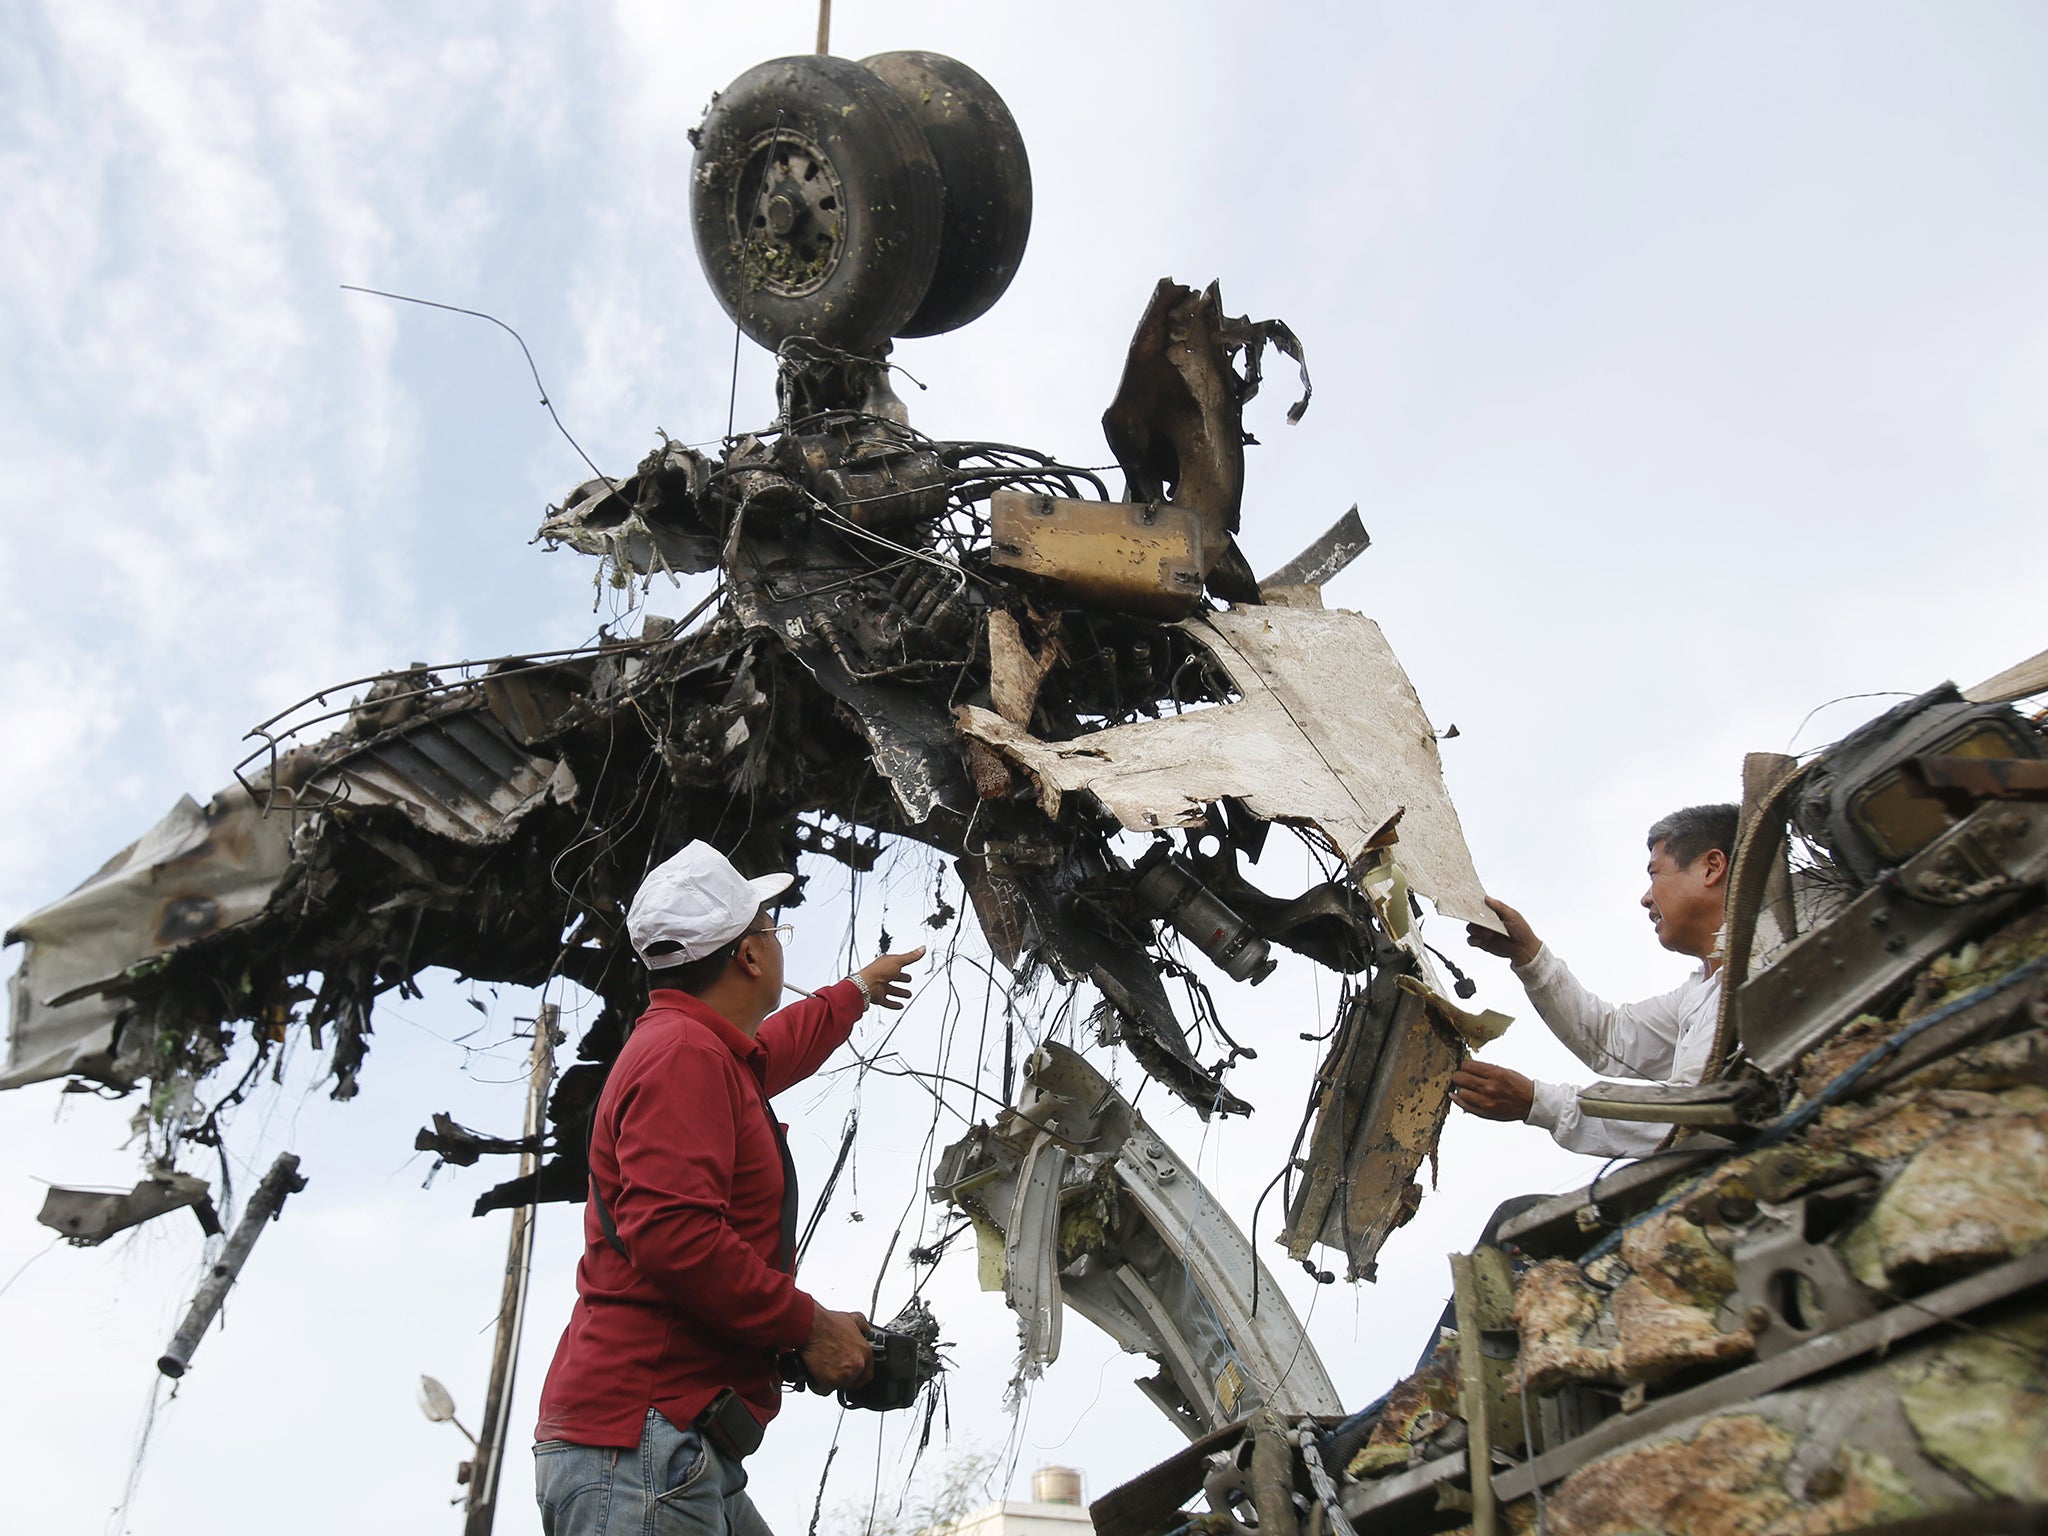 Emergency workers remove the wreckage of crashed TransAsia Airways flight GE222 on the outlying island of Penghu